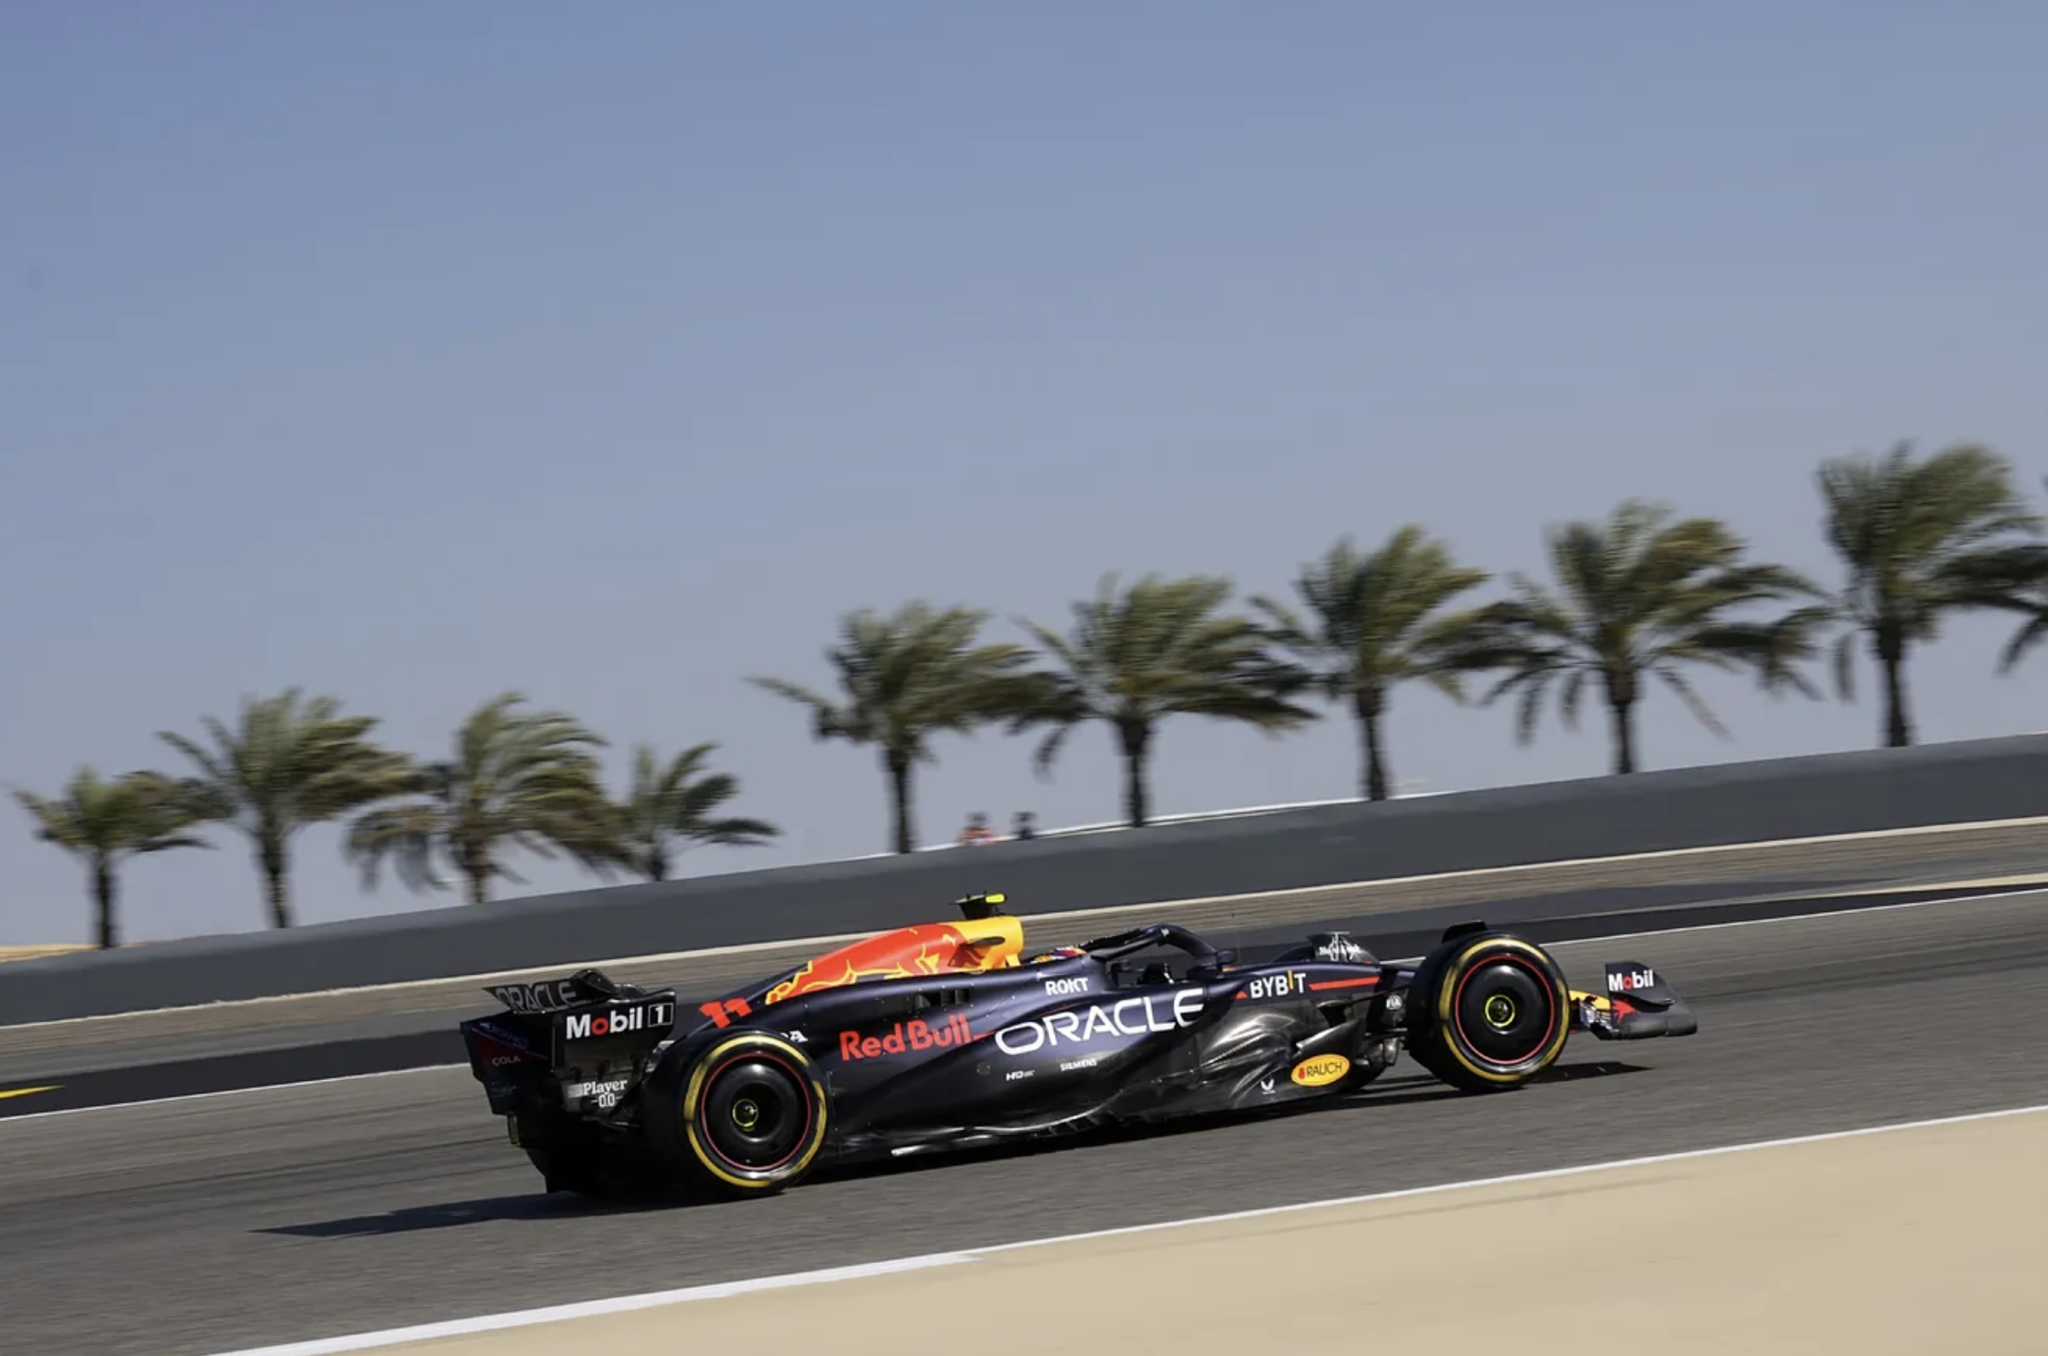 Red Bull off to an uphill start in Bahrain as Mercedes dominate Practice 2 with Hamilton and Russell quickest